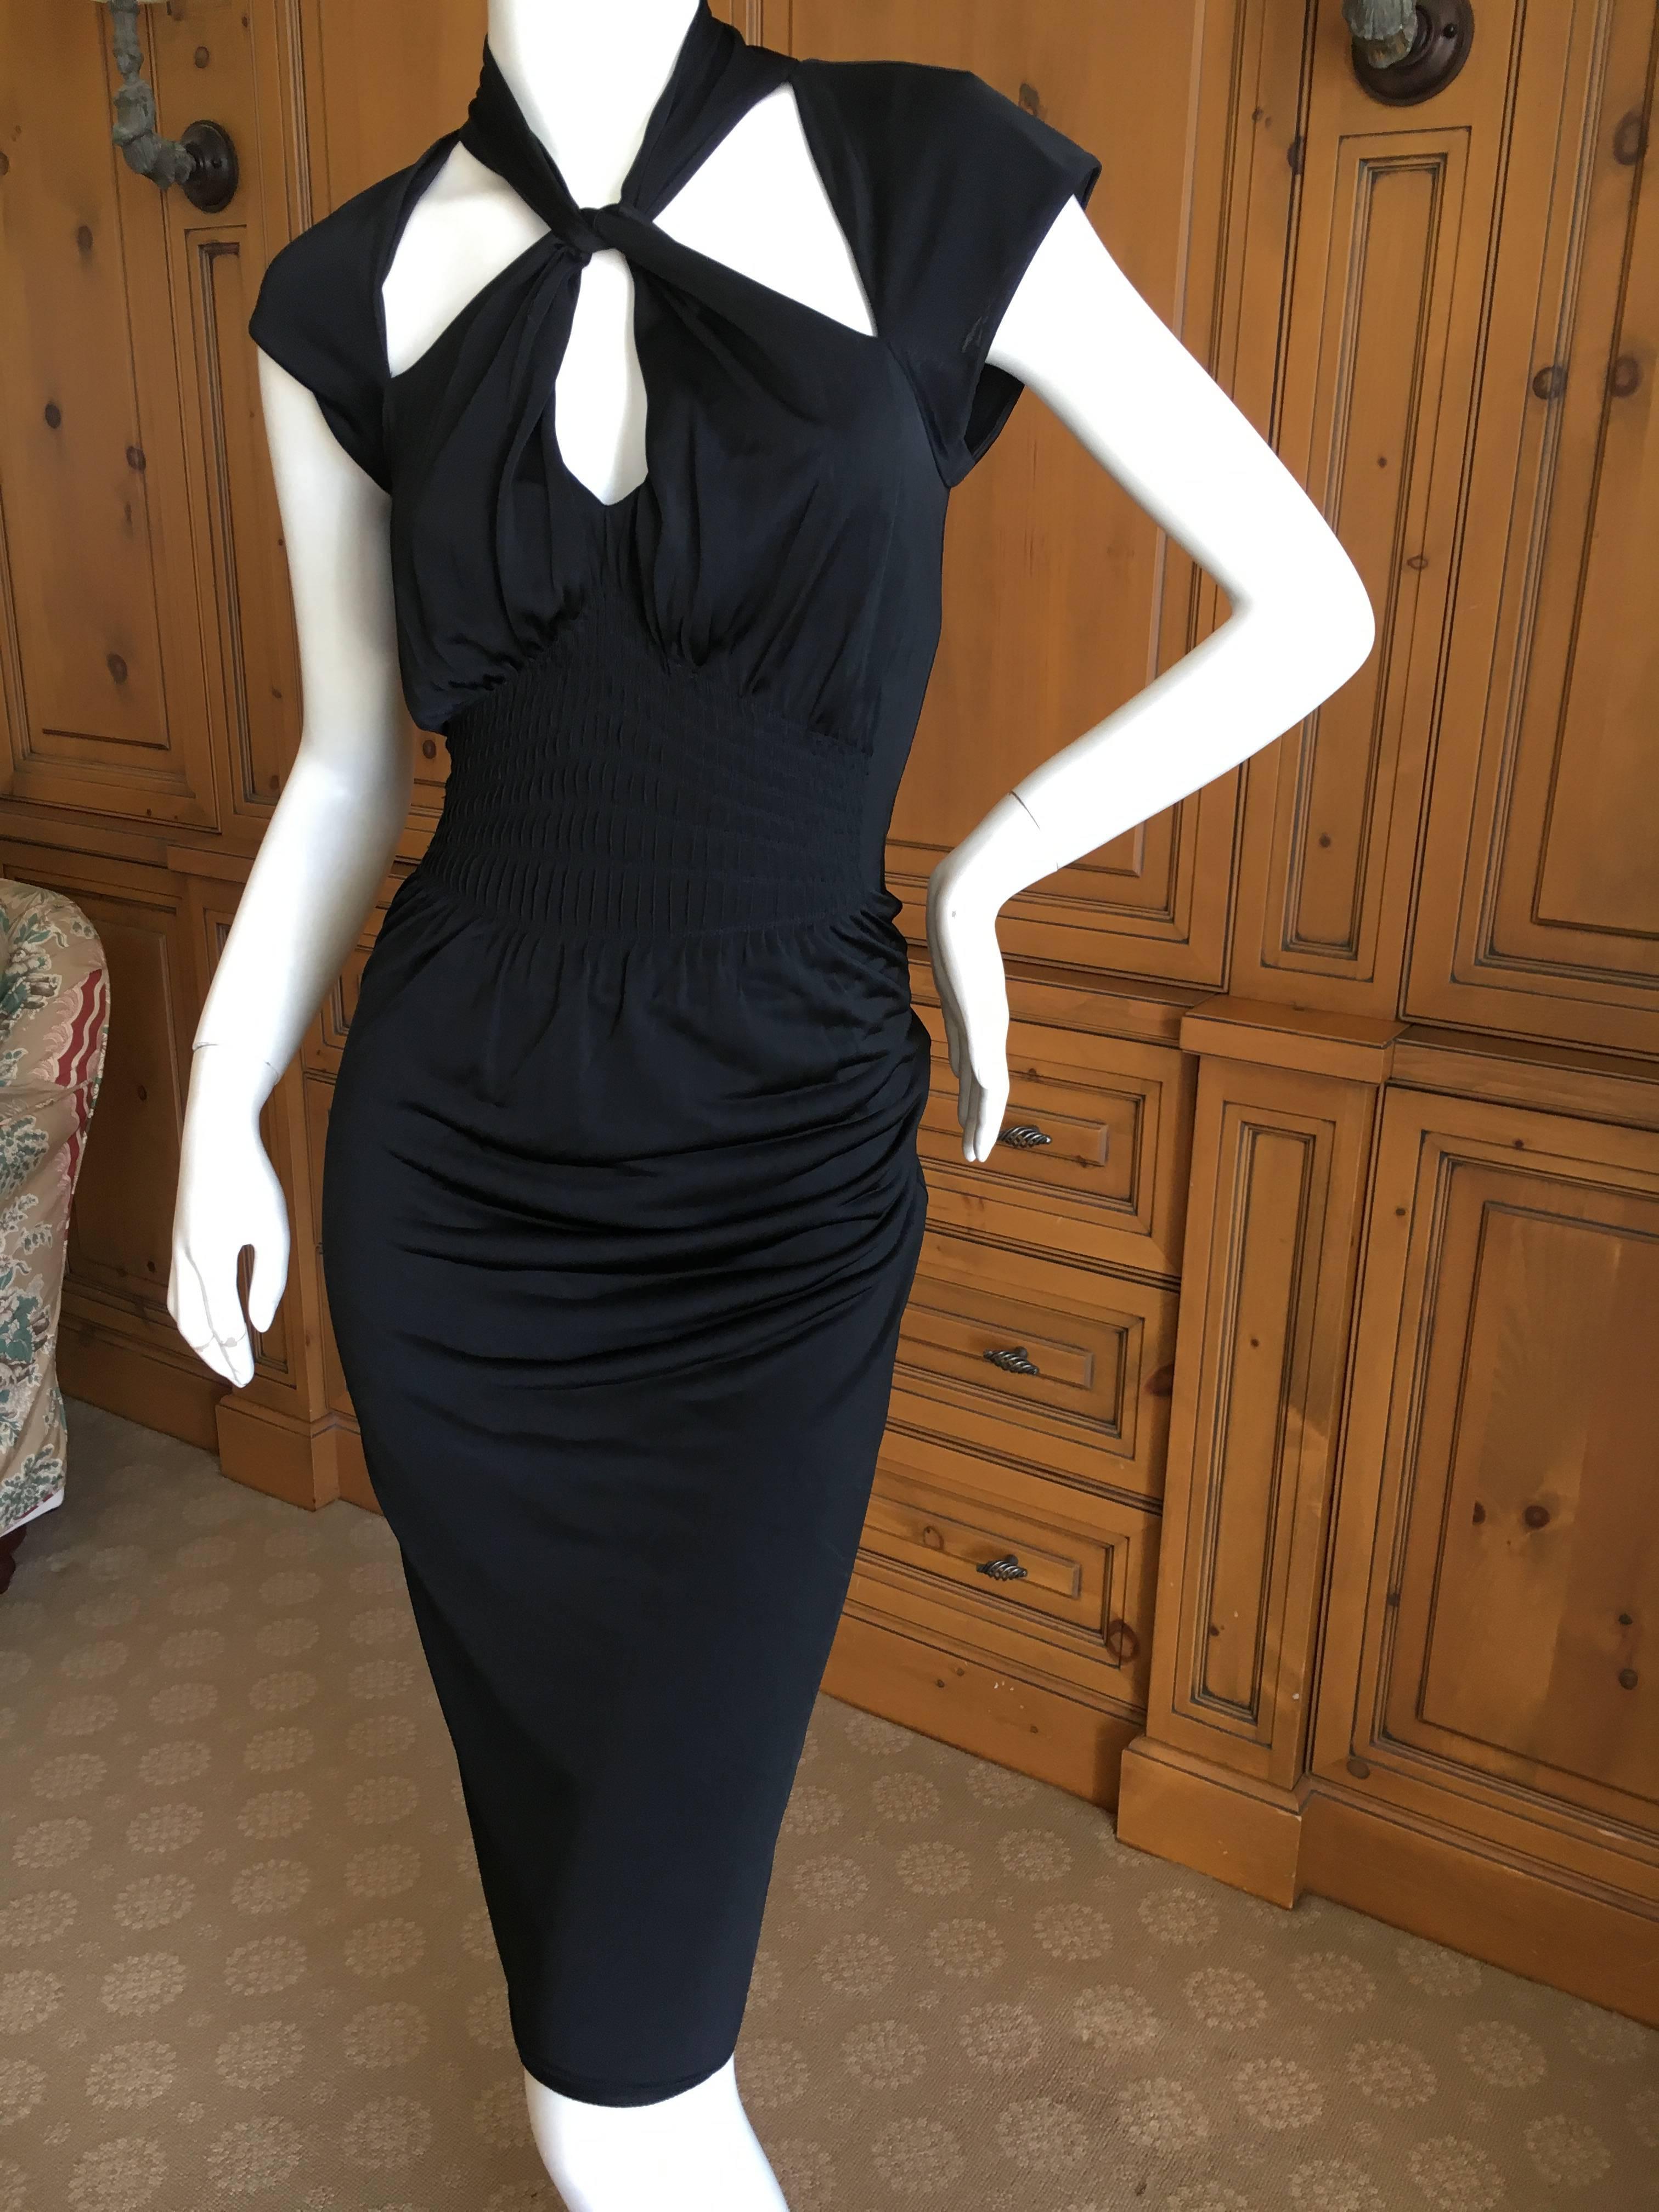 Gucci by Tom Ford Black Backless Knot Dress In Excellent Condition For Sale In Cloverdale, CA